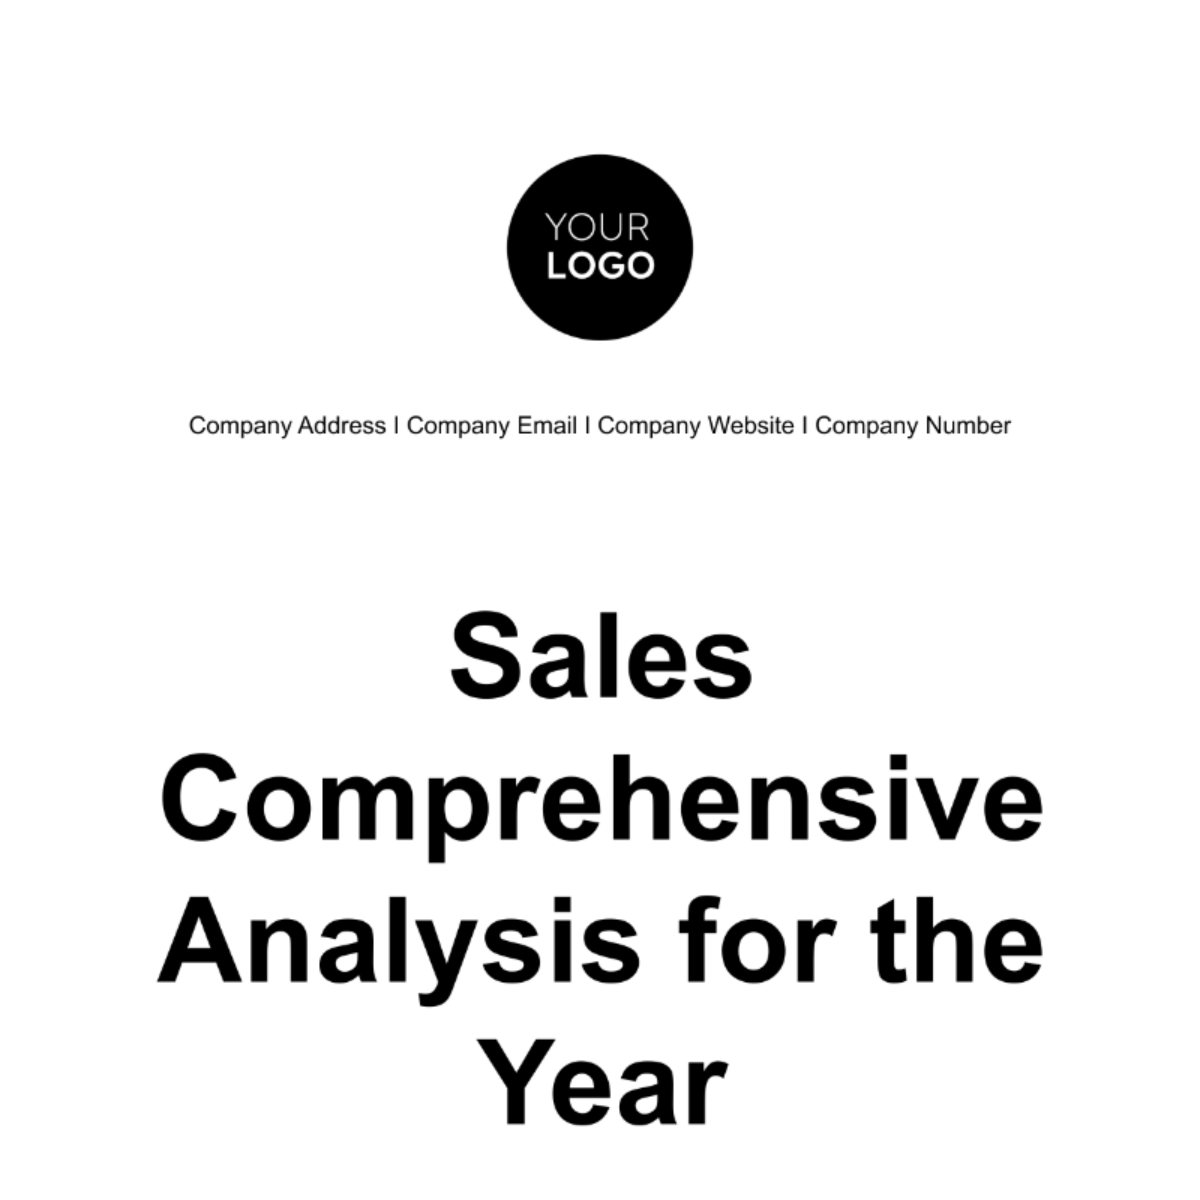 Sales Comprehensive Analysis for the Year Template